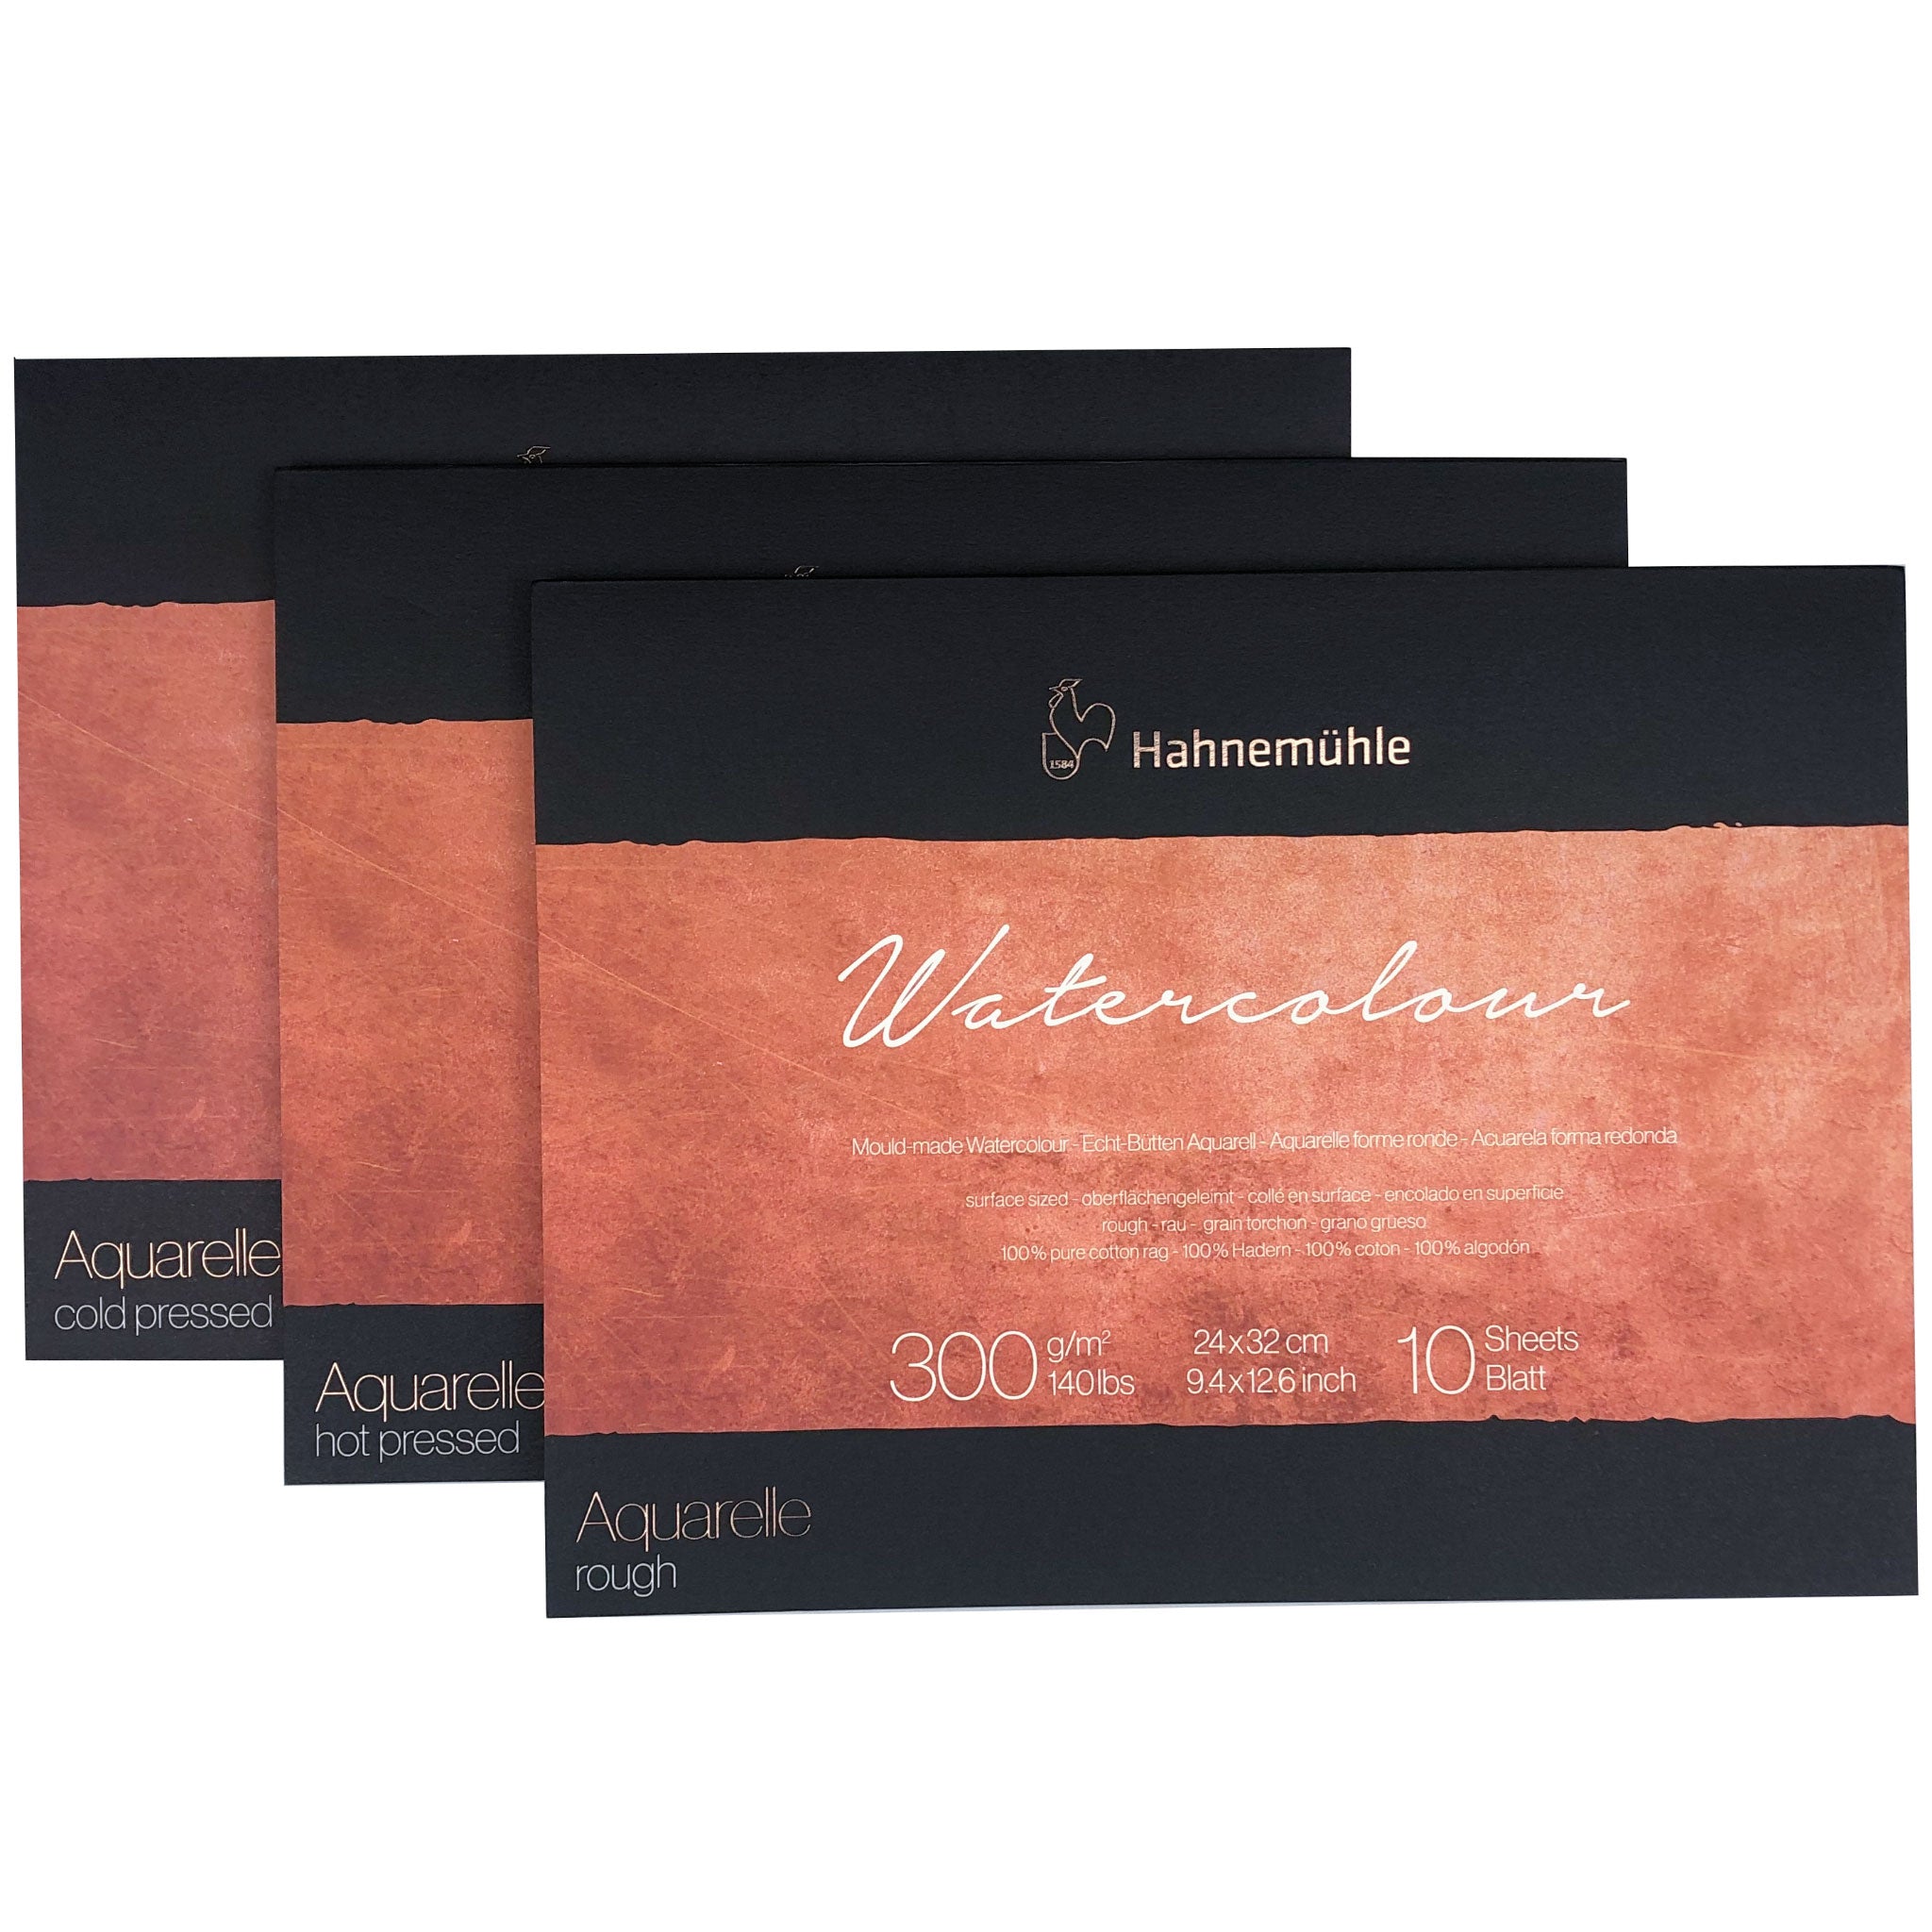 Hahnemuhle Collection Watercolor Paper